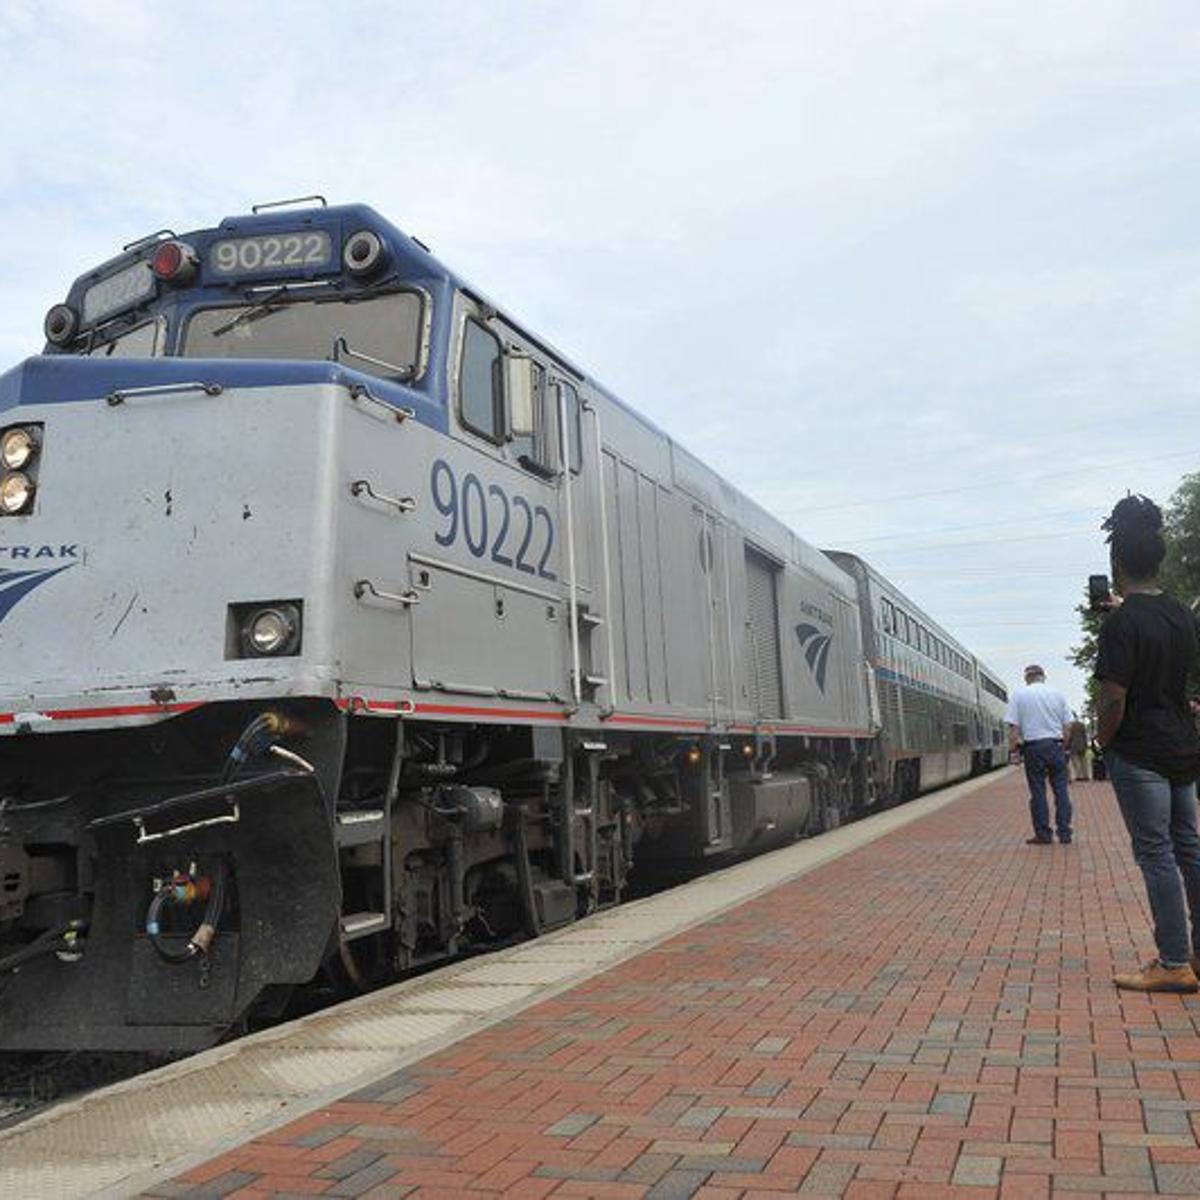 Heartland Flyer keeps on chugging after 20 years | Local News |  normantranscript.com